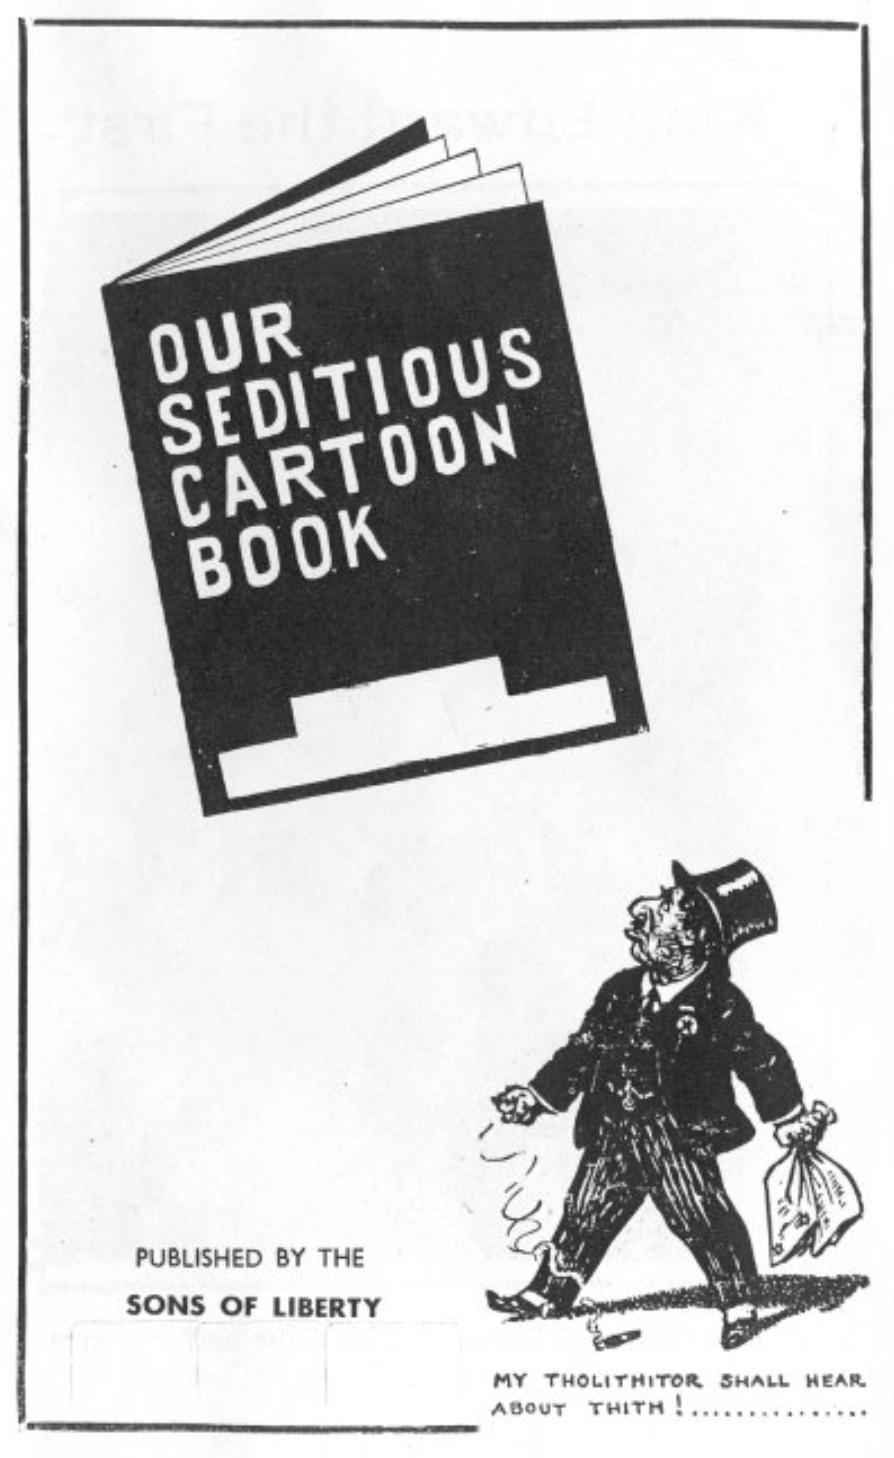 Our Seditious Cartoon Book (1946) by Arnold Spencer Leese